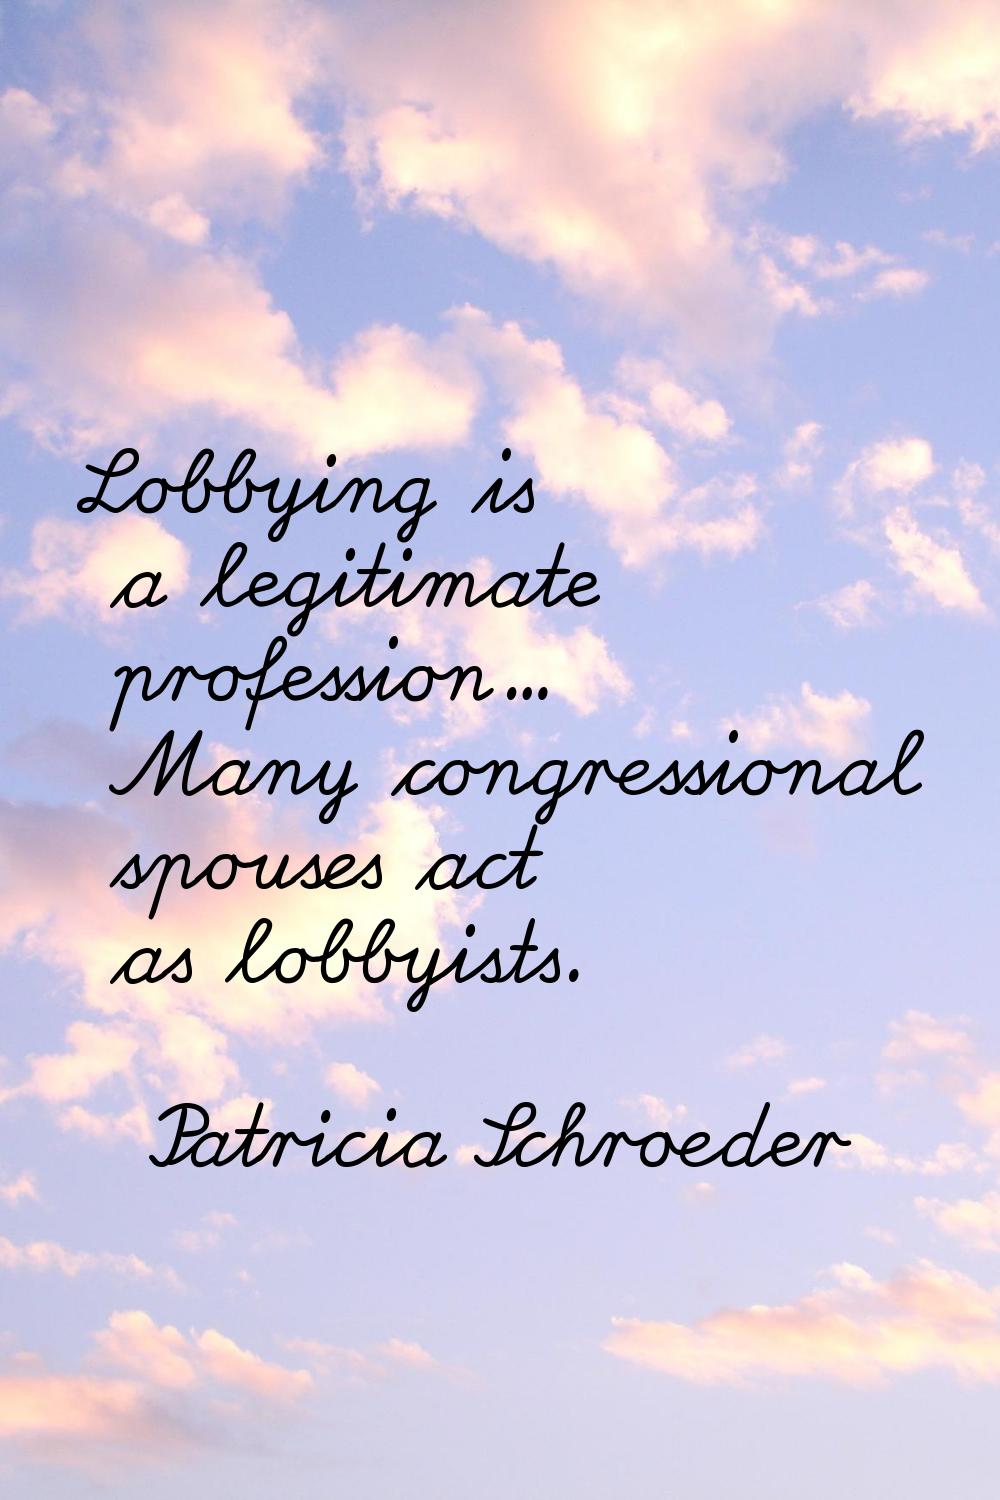 Lobbying is a legitimate profession... Many congressional spouses act as lobbyists.